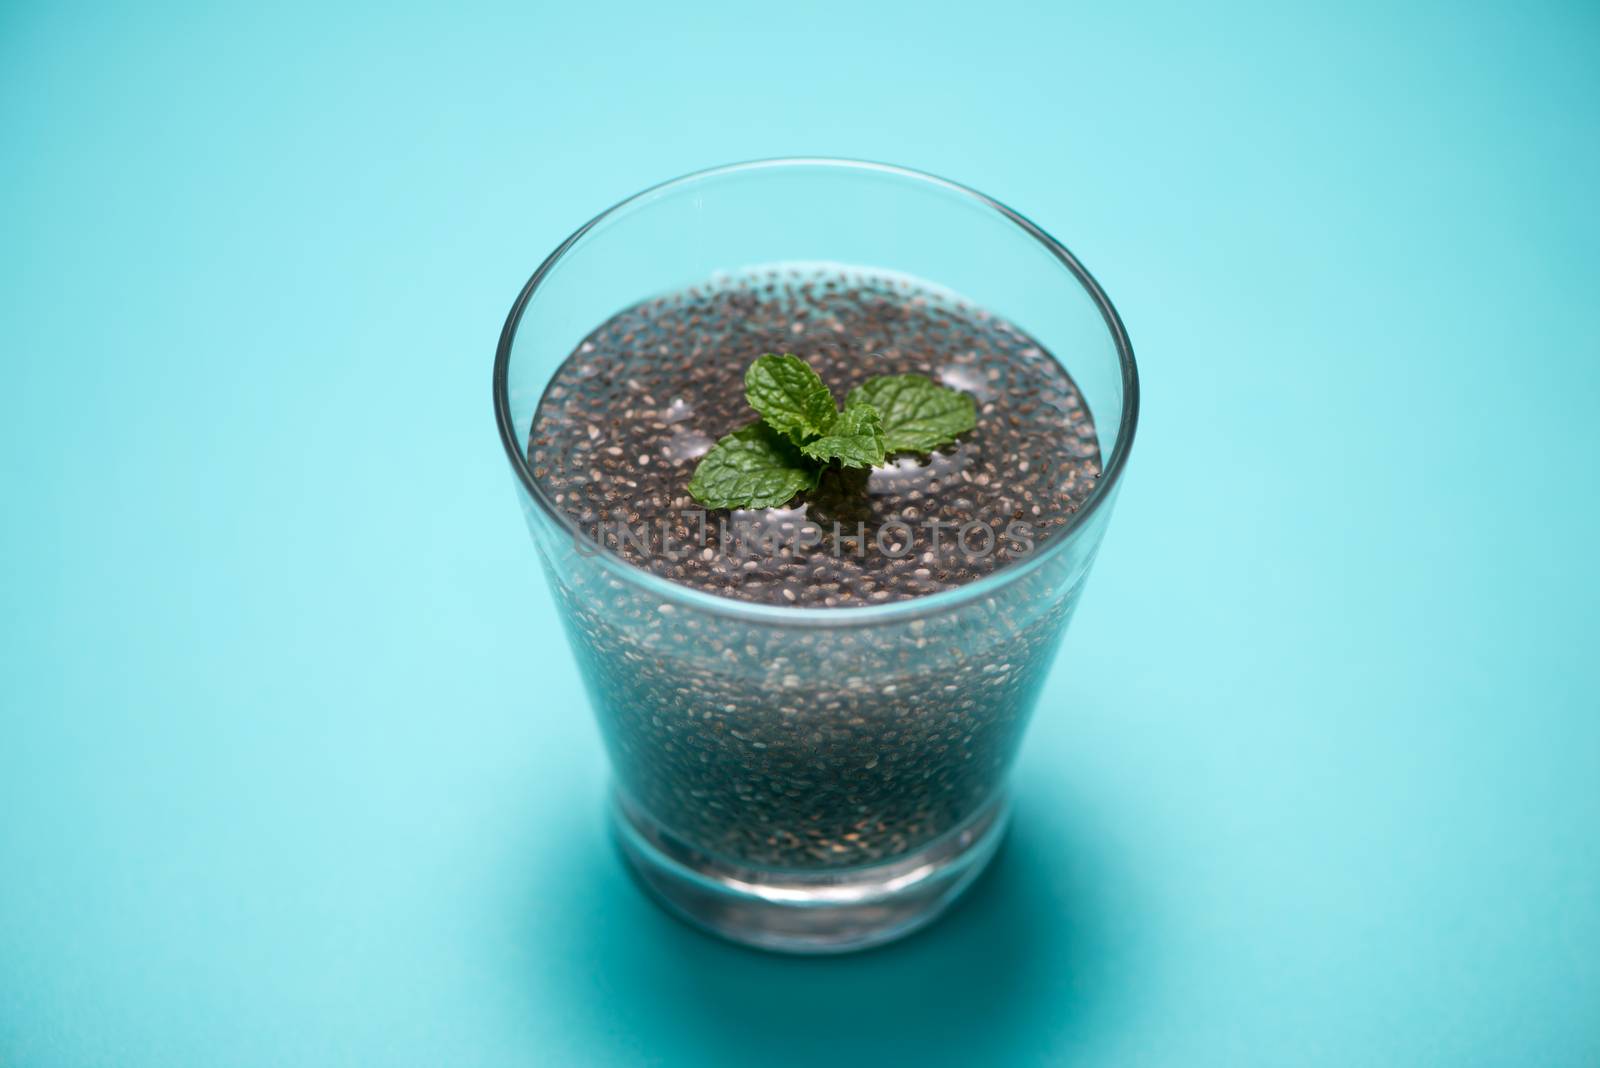 Glass of water with cup of healthy chia seeds and spoon. Text sp by makidotvn